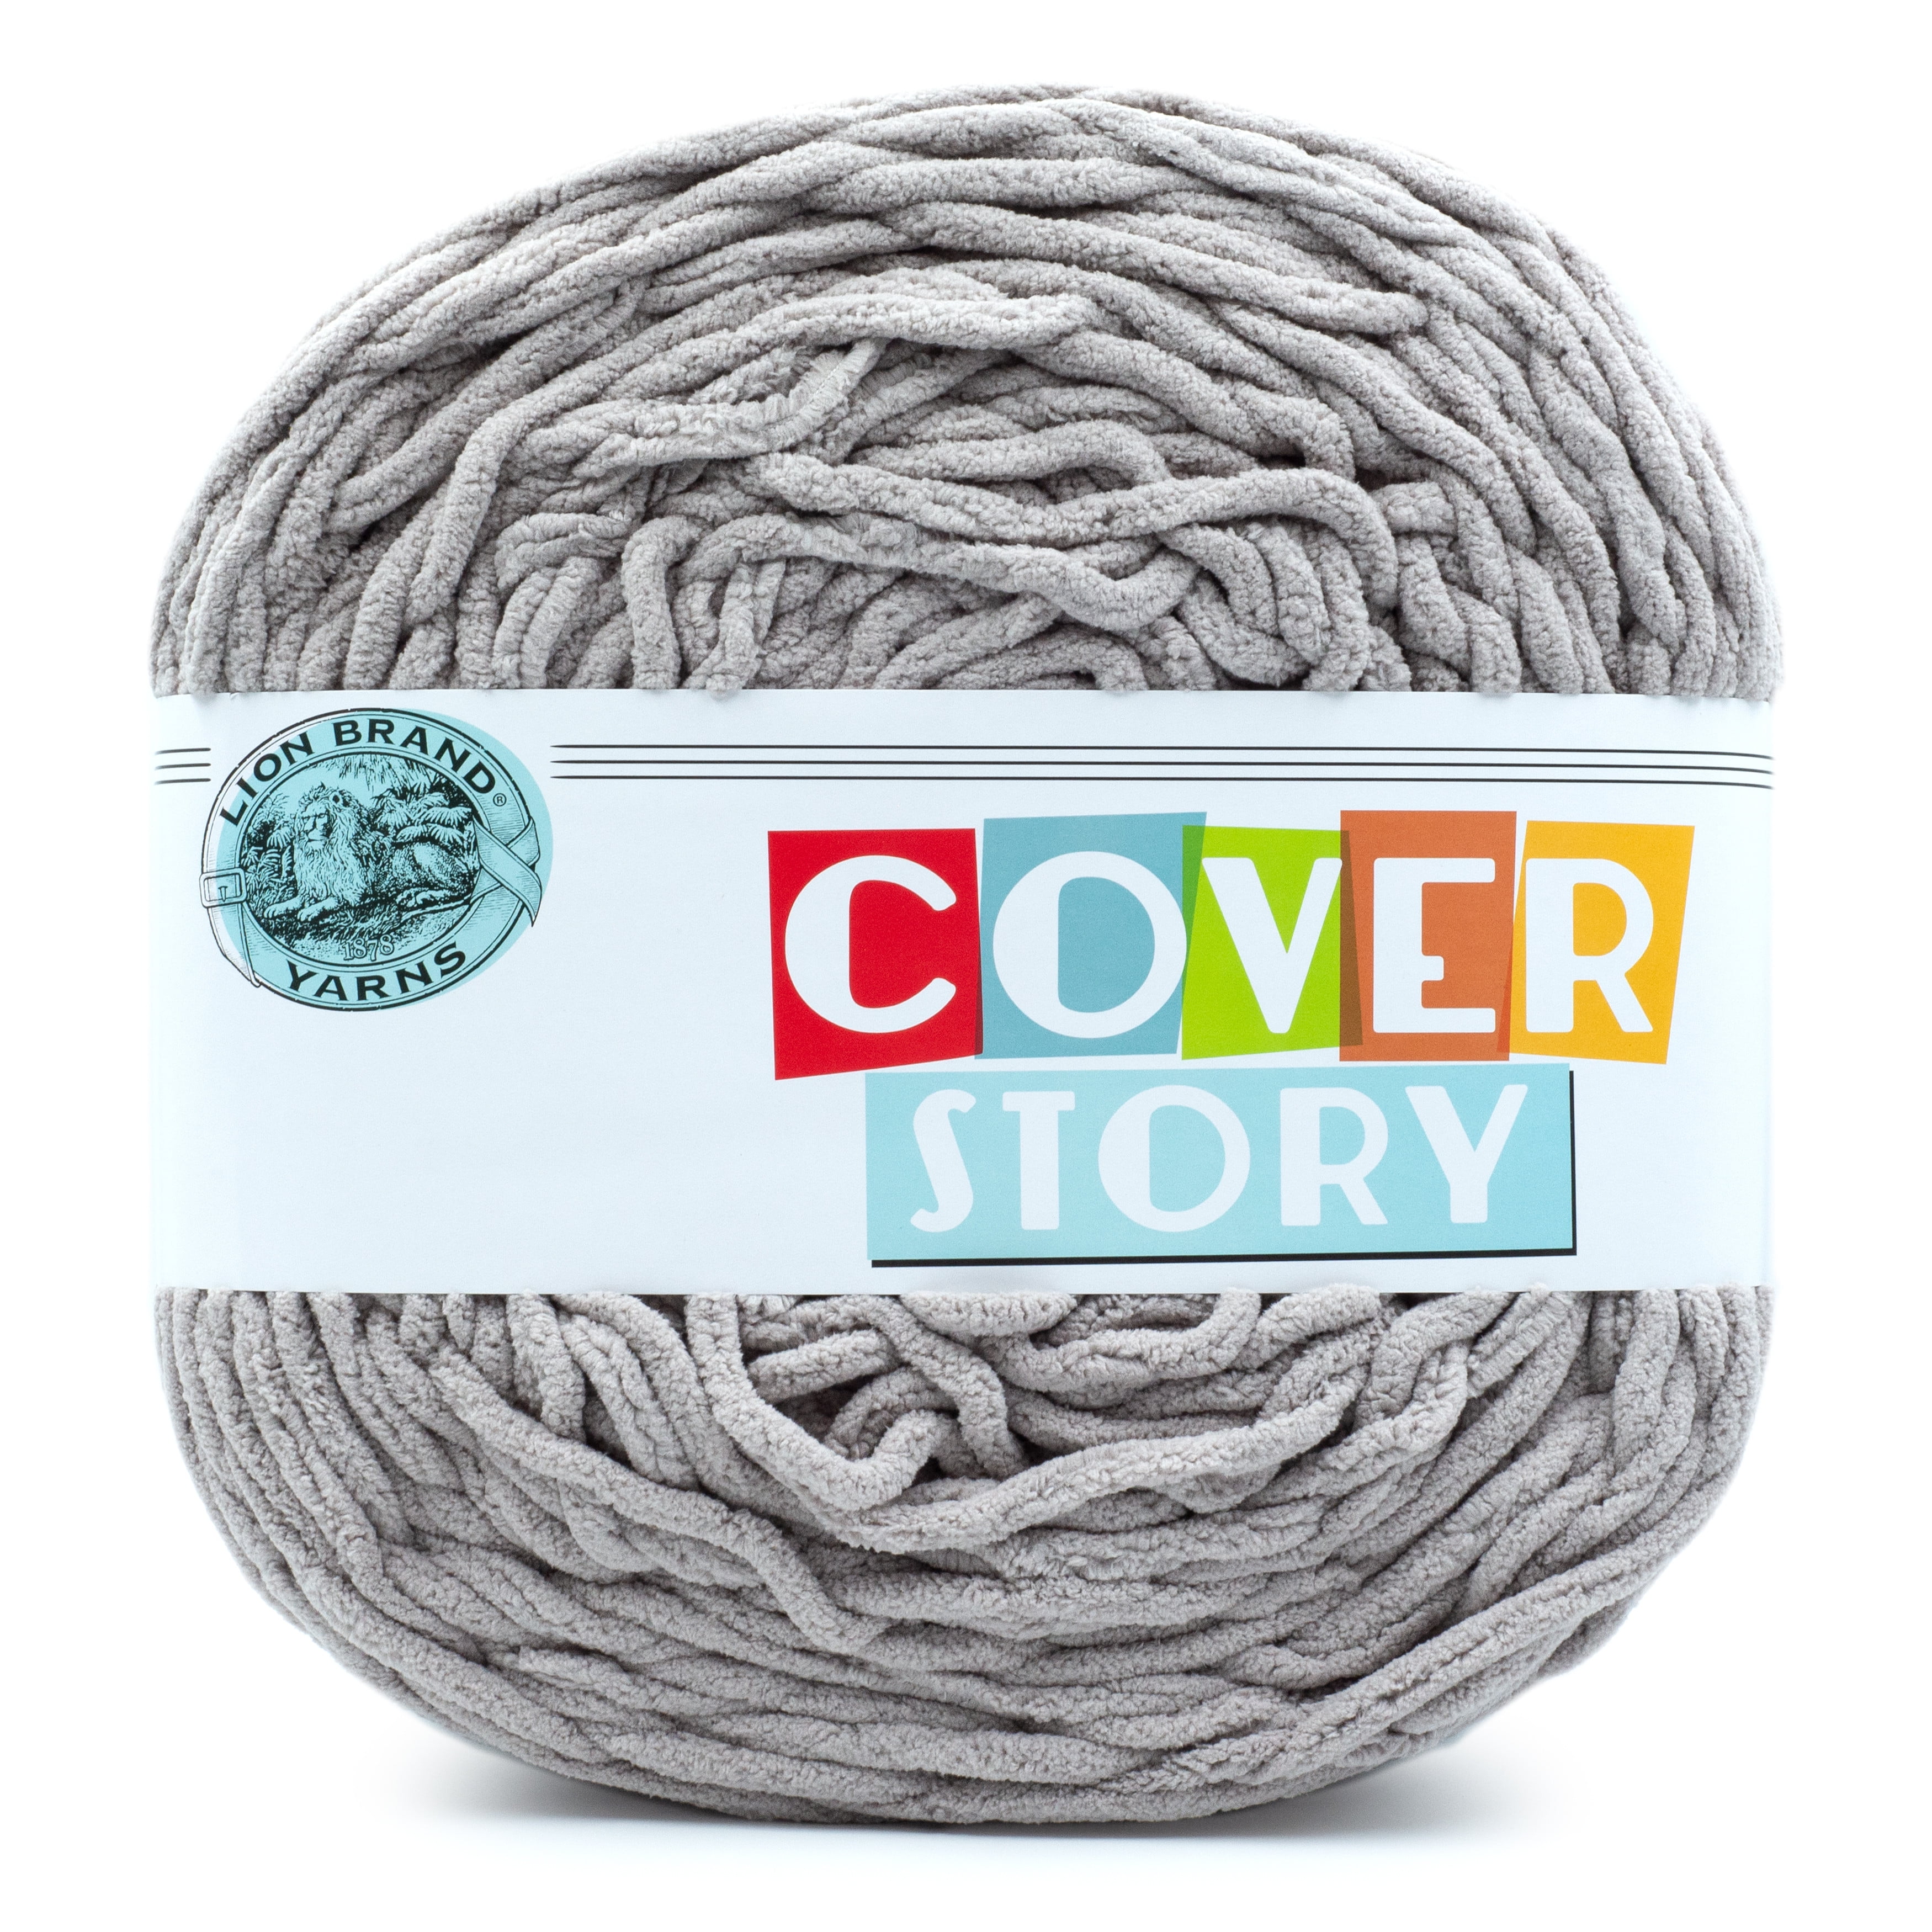 Lion Brand Yarn 533-123 Cover Story Yarn, Mineral (1 Giant Cake)